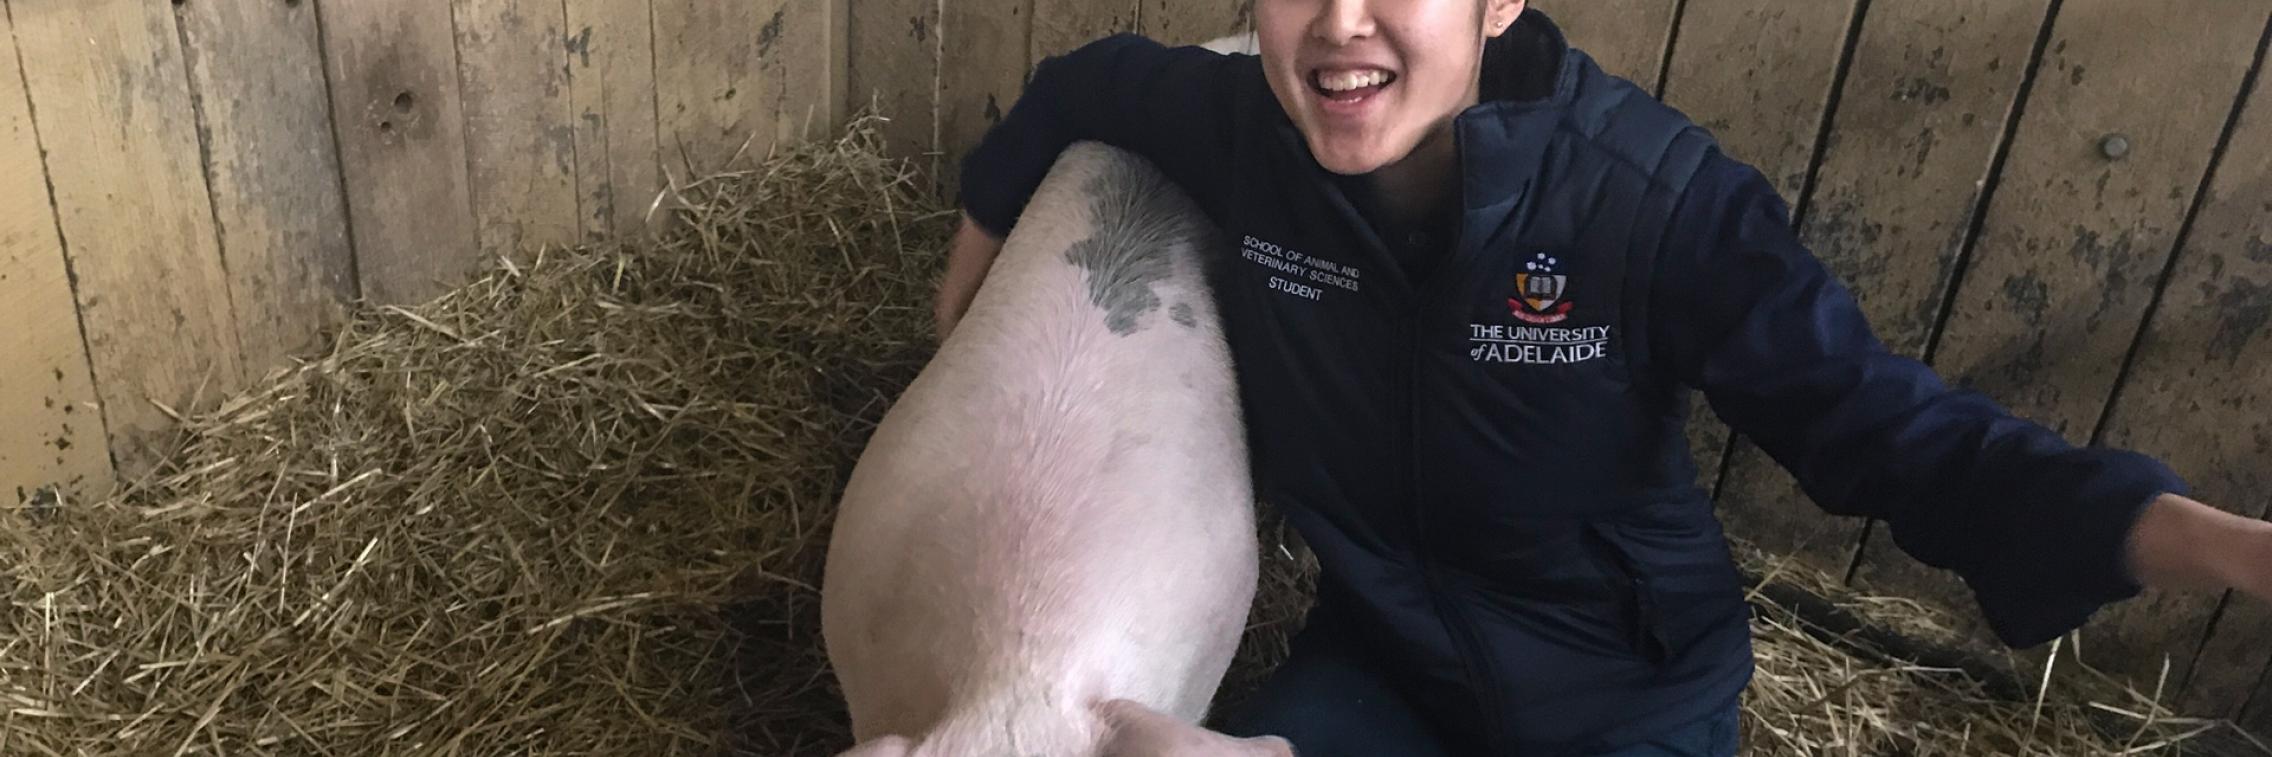 Molly Oshiro with a pig at the Royal Adelaide Show